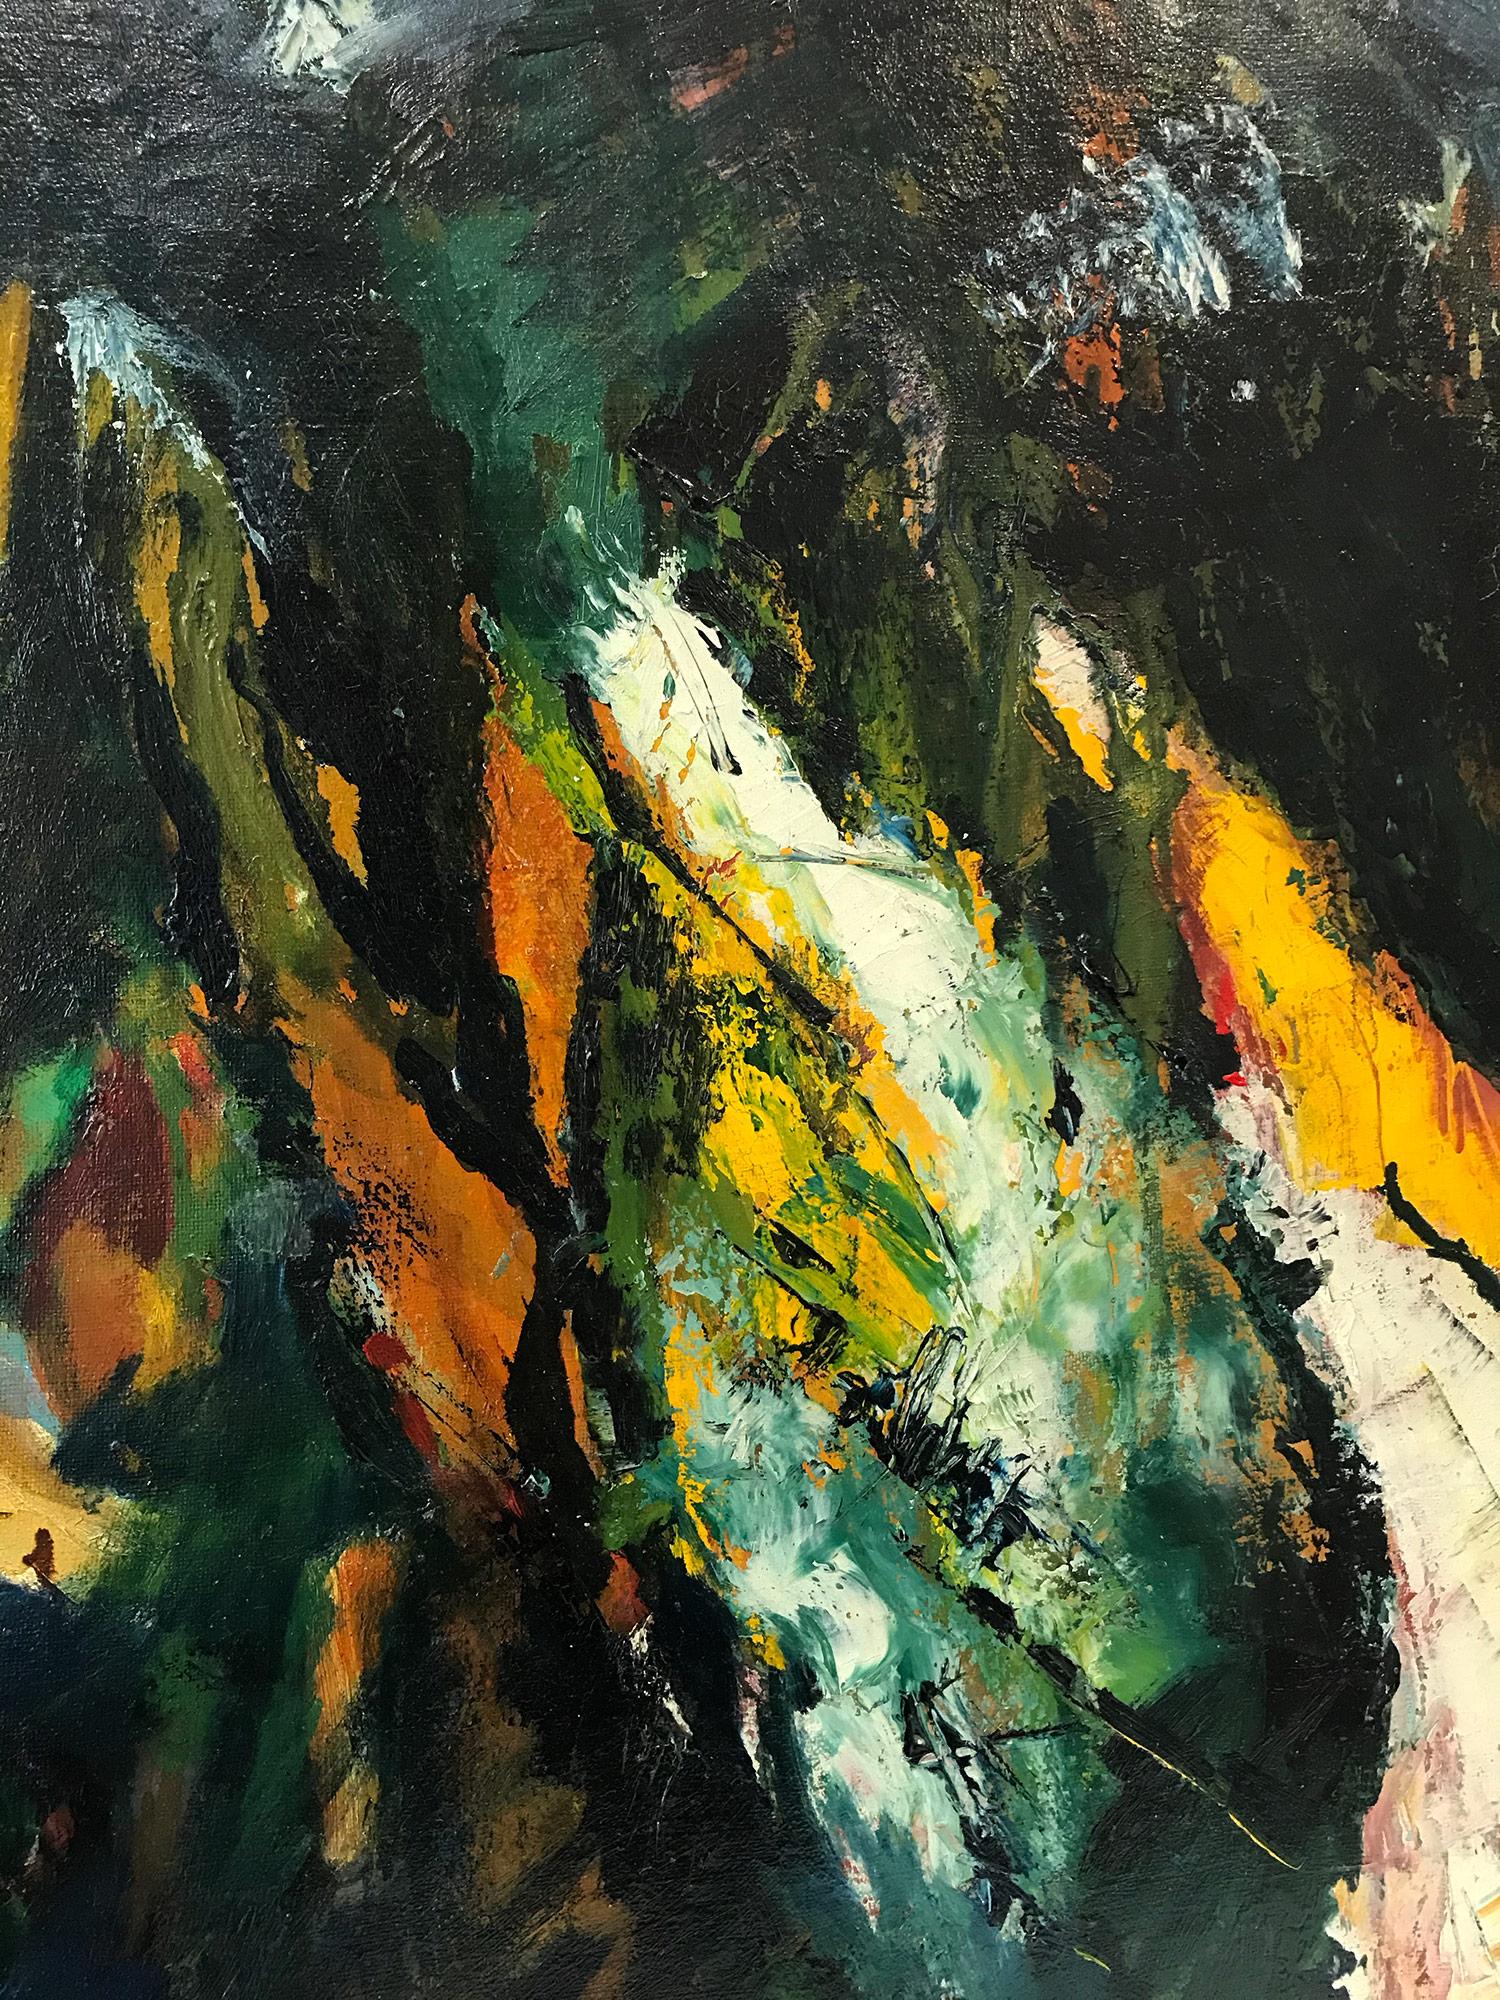 An abstract expressionist Mid 20th Century piece by Bern Porter, presenting vivid use of paint and complex lines and color placement. A strong modernist oil painting depicted in 1959 with bold, thick brushwork. The painting is signed lower left and